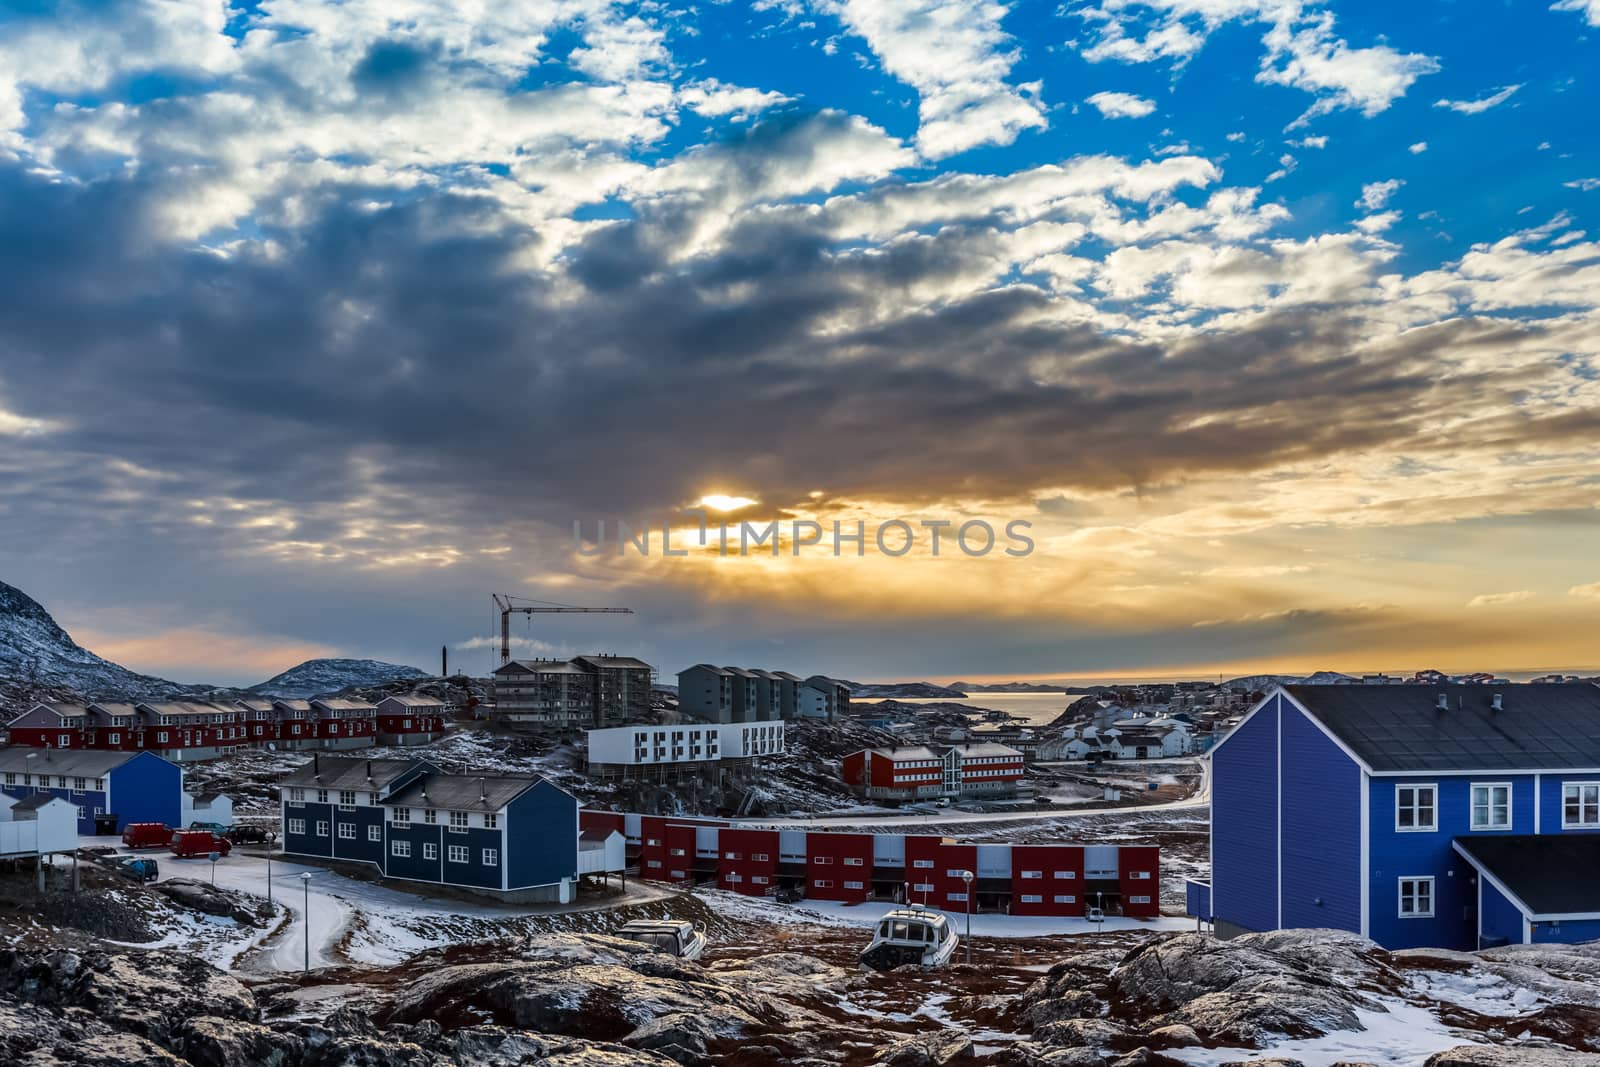 Arctic houses growing on the rocky hills in sunset panorama. Nuu by ambeon